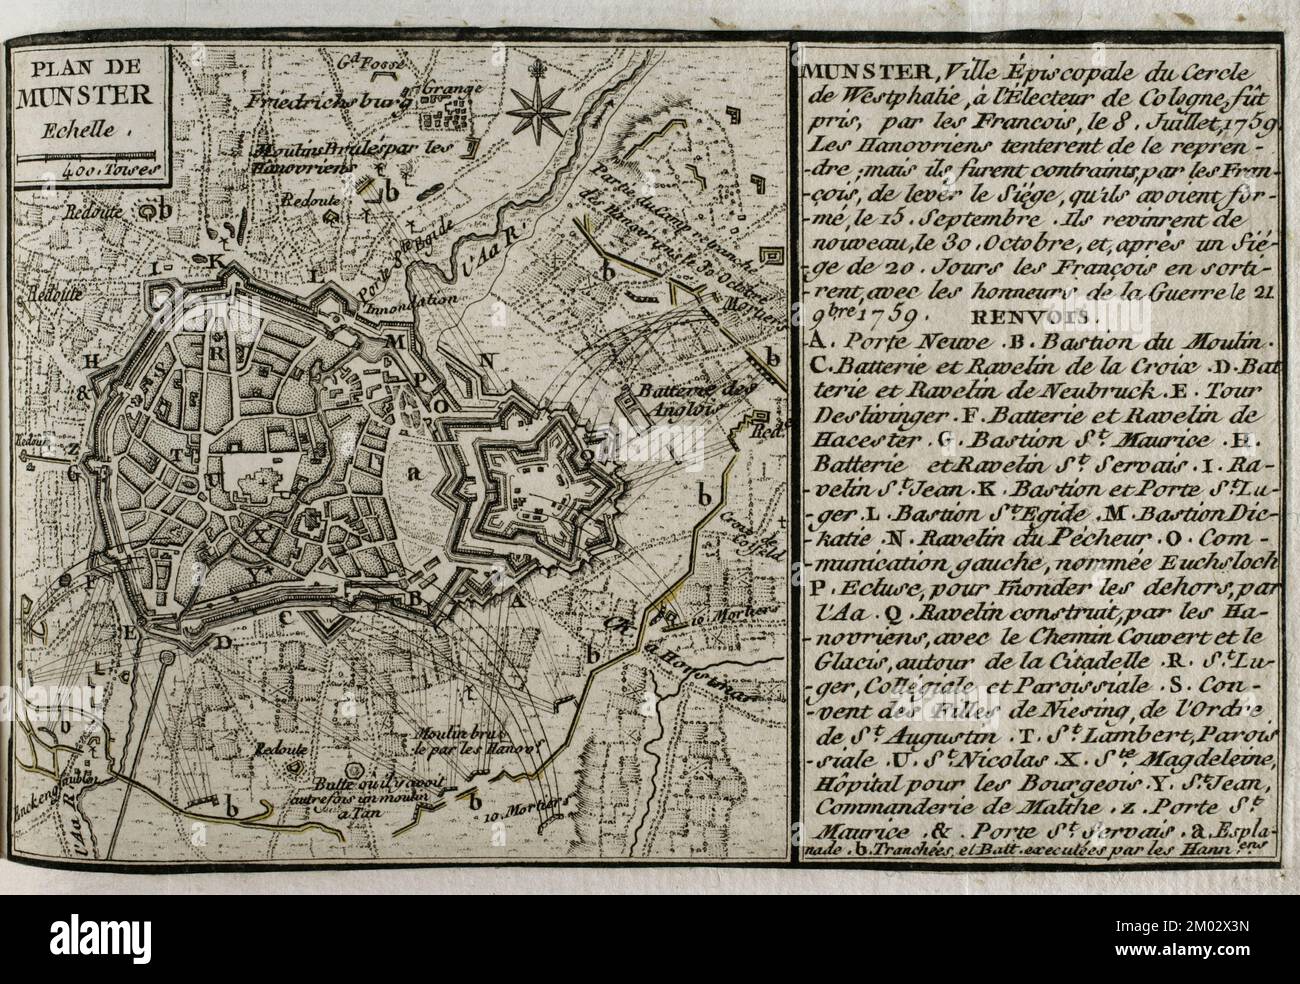 War of the Seven Years (1756-1763). Plan of Münster, 1759. Episcopal city of the imperial circle of Westphalia. It was taken by the French on 8 July 1759. The Hanoverians tried to retake Munster, but on 15 September the French succeeded in lifting the siege of the town. The Hanoverians returned again on 30 October, and after a 20-day siege, the French had to abandon it, leaving with the honours of war on 21 November 1759. Published in 1765 by the cartographer Jean de Beaurain (1696-1771) as an illustration of his Great Map of Germany, with the events that took place during the Seven Years War. Stock Photo